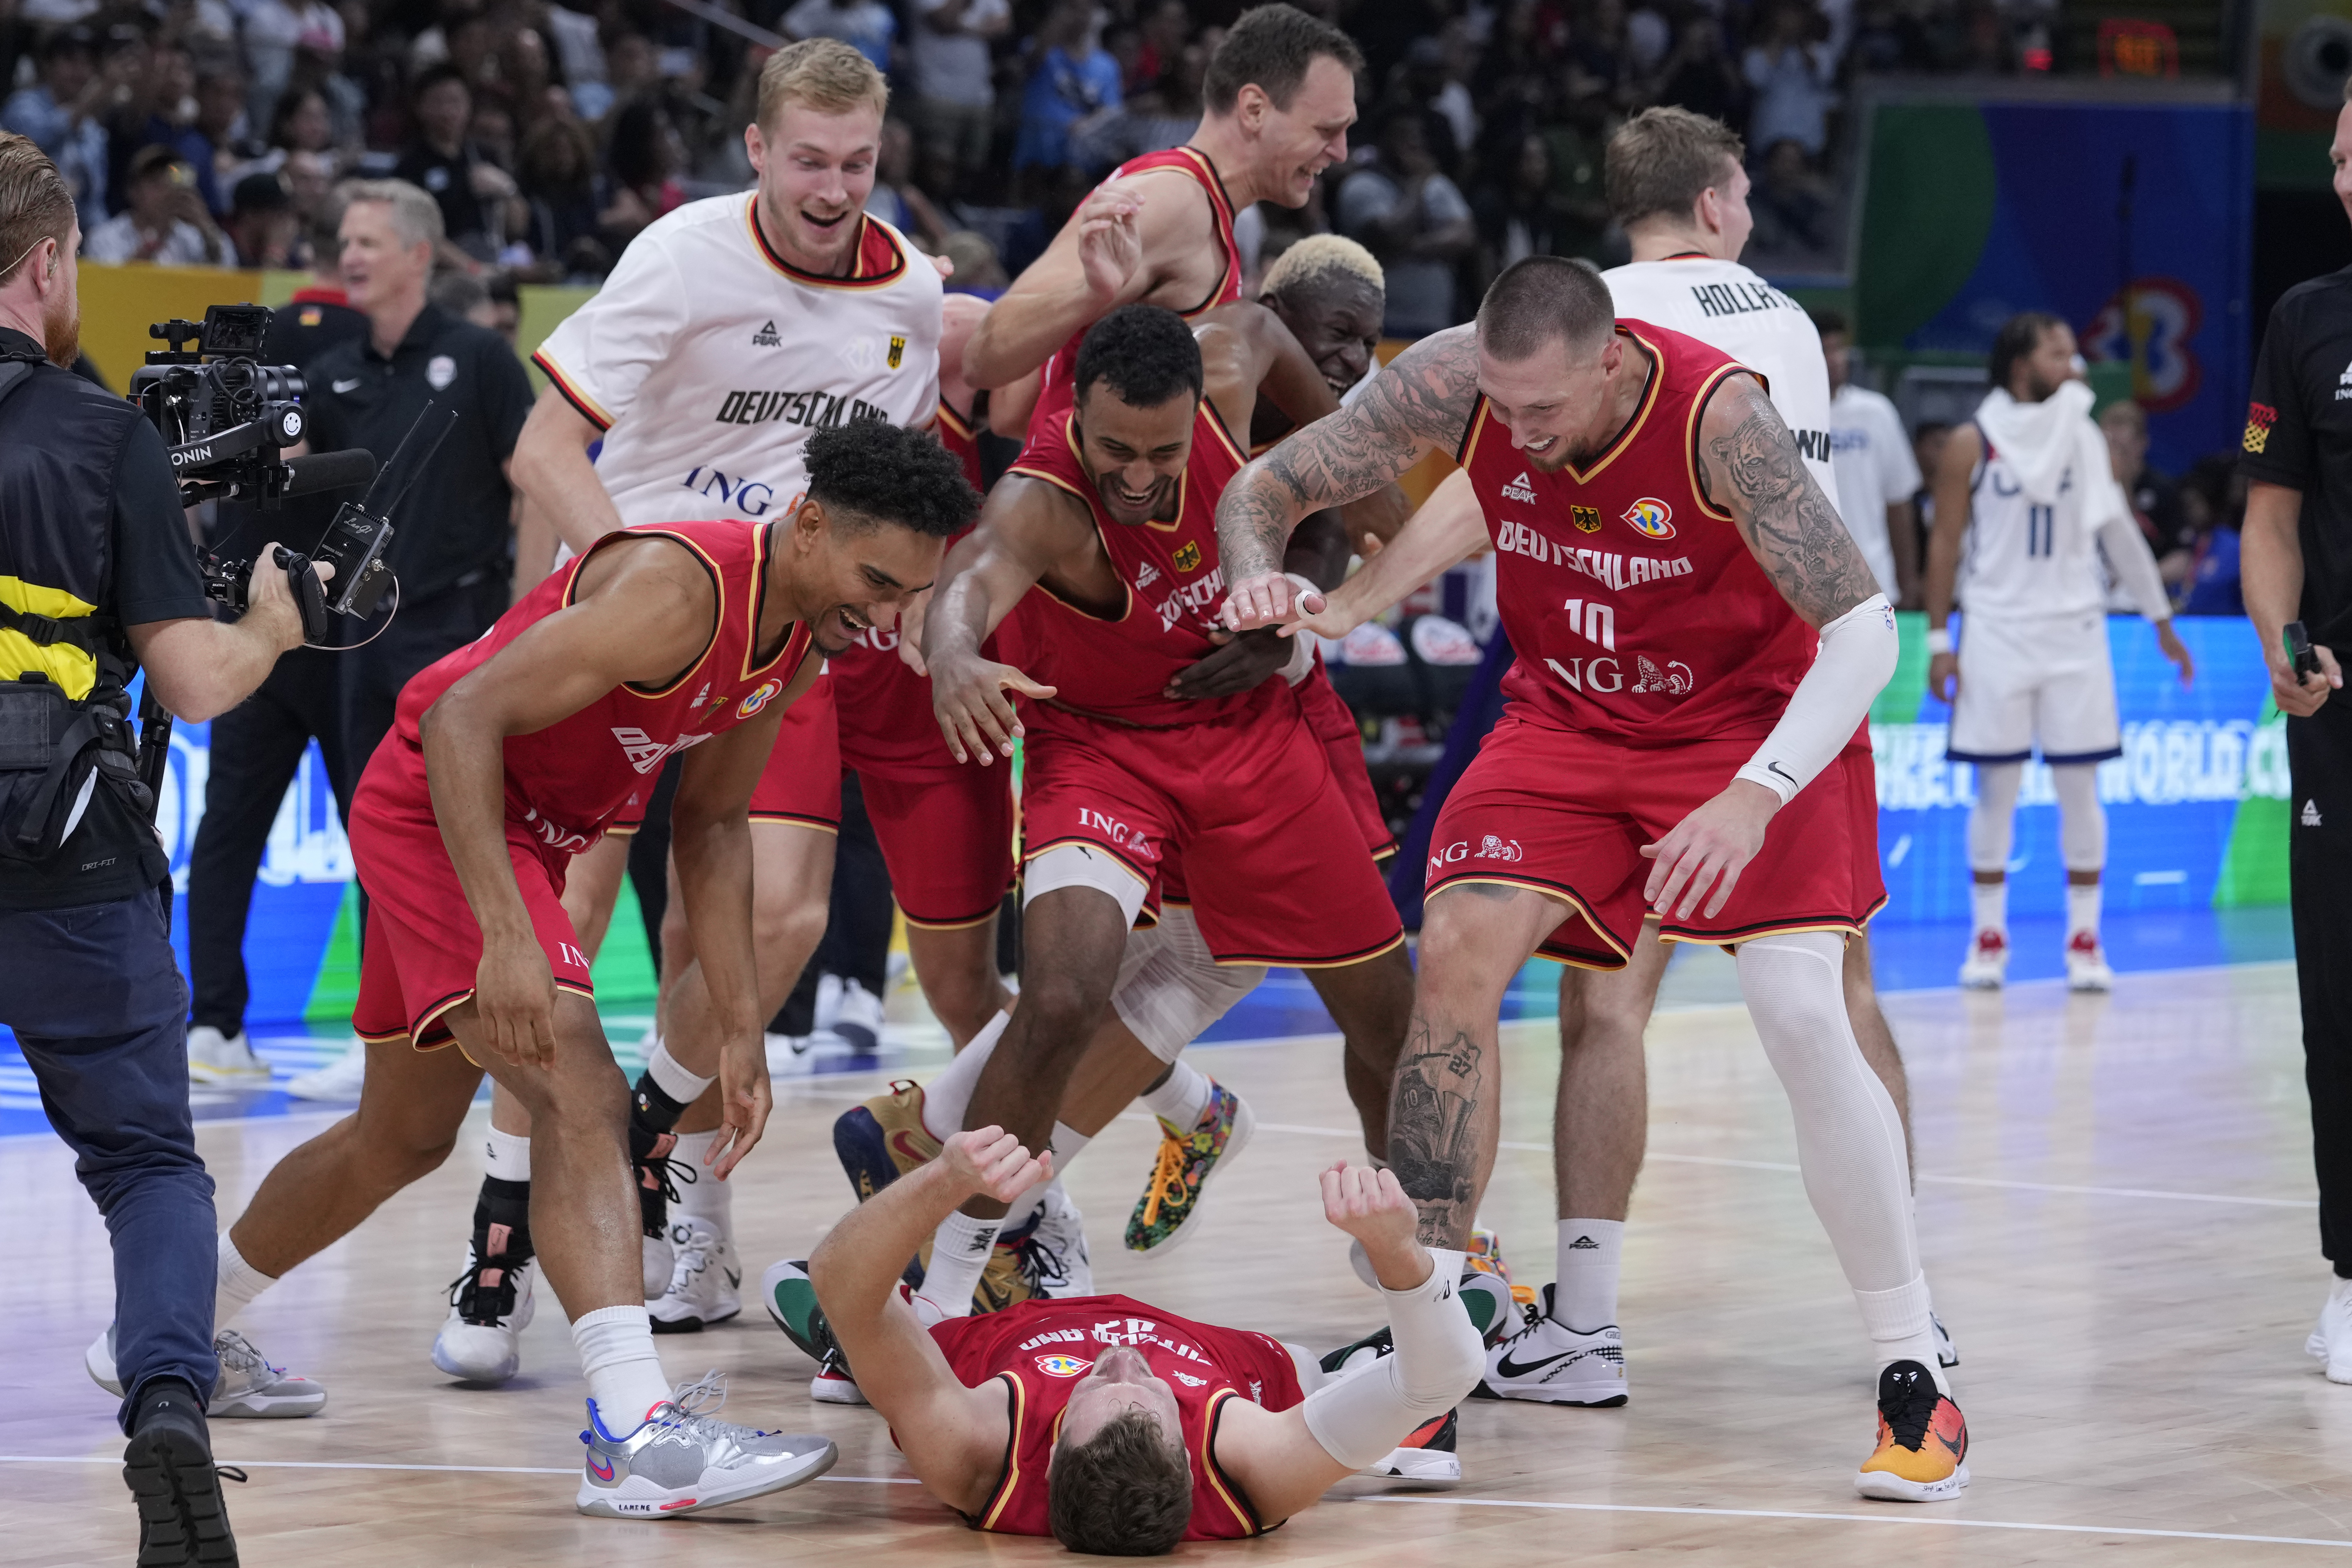 Germany guard Andreas Obst lays on the ground as teammates celebrates after winning against the United States in a Basketball World Cup semi final game in Manila, Philippines, Friday, Sept. 8, 2023. (AP Photo/Michael Conroy)